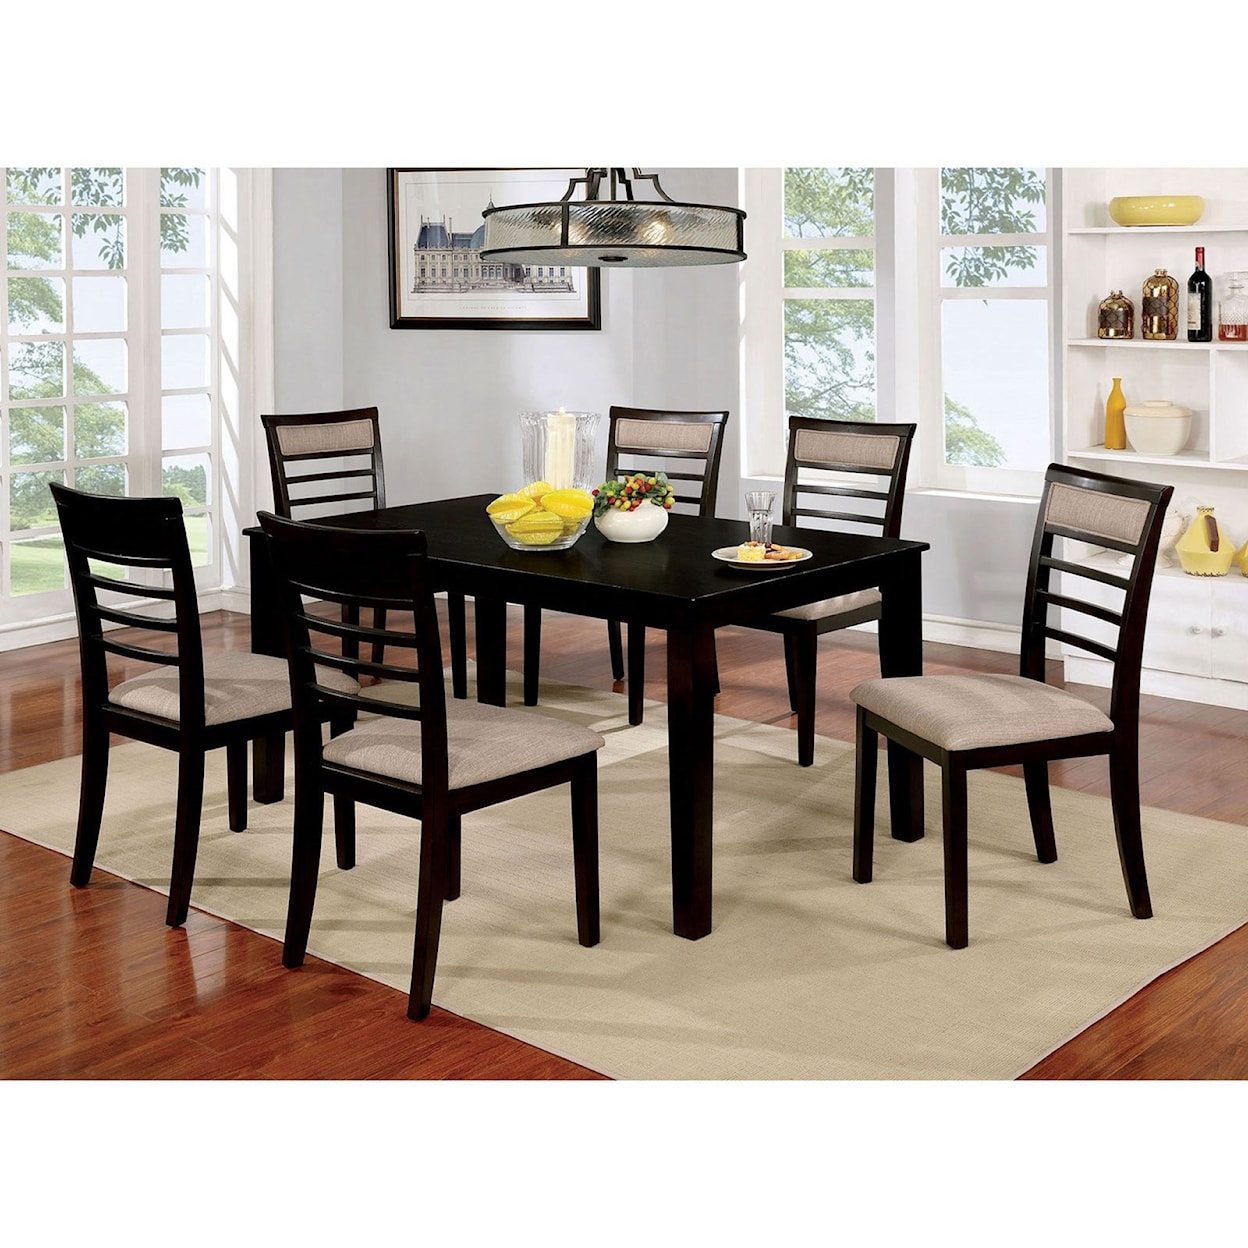 Furniture of America Fafnir 7 Piece Table and Chair Set